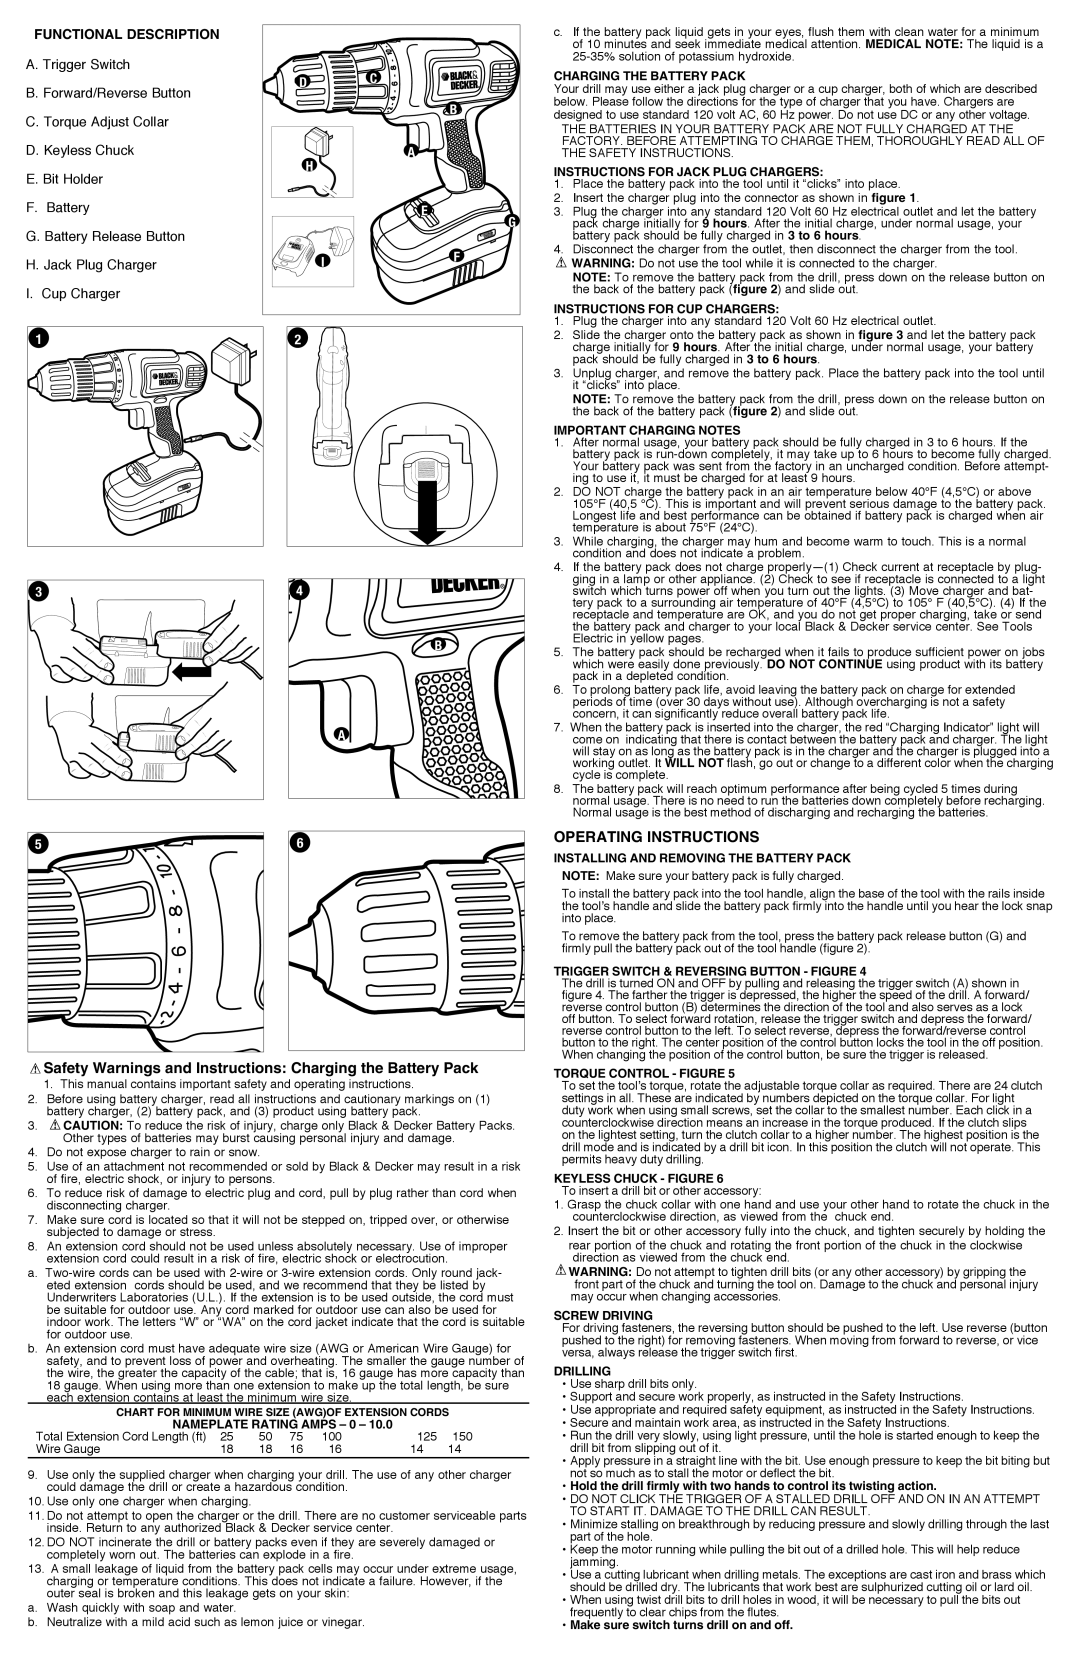 Black & Decker GC1200 Safety Warnings and Instructions Charging the Battery Pack, Operating Instructions, D. Keyless Chuck 